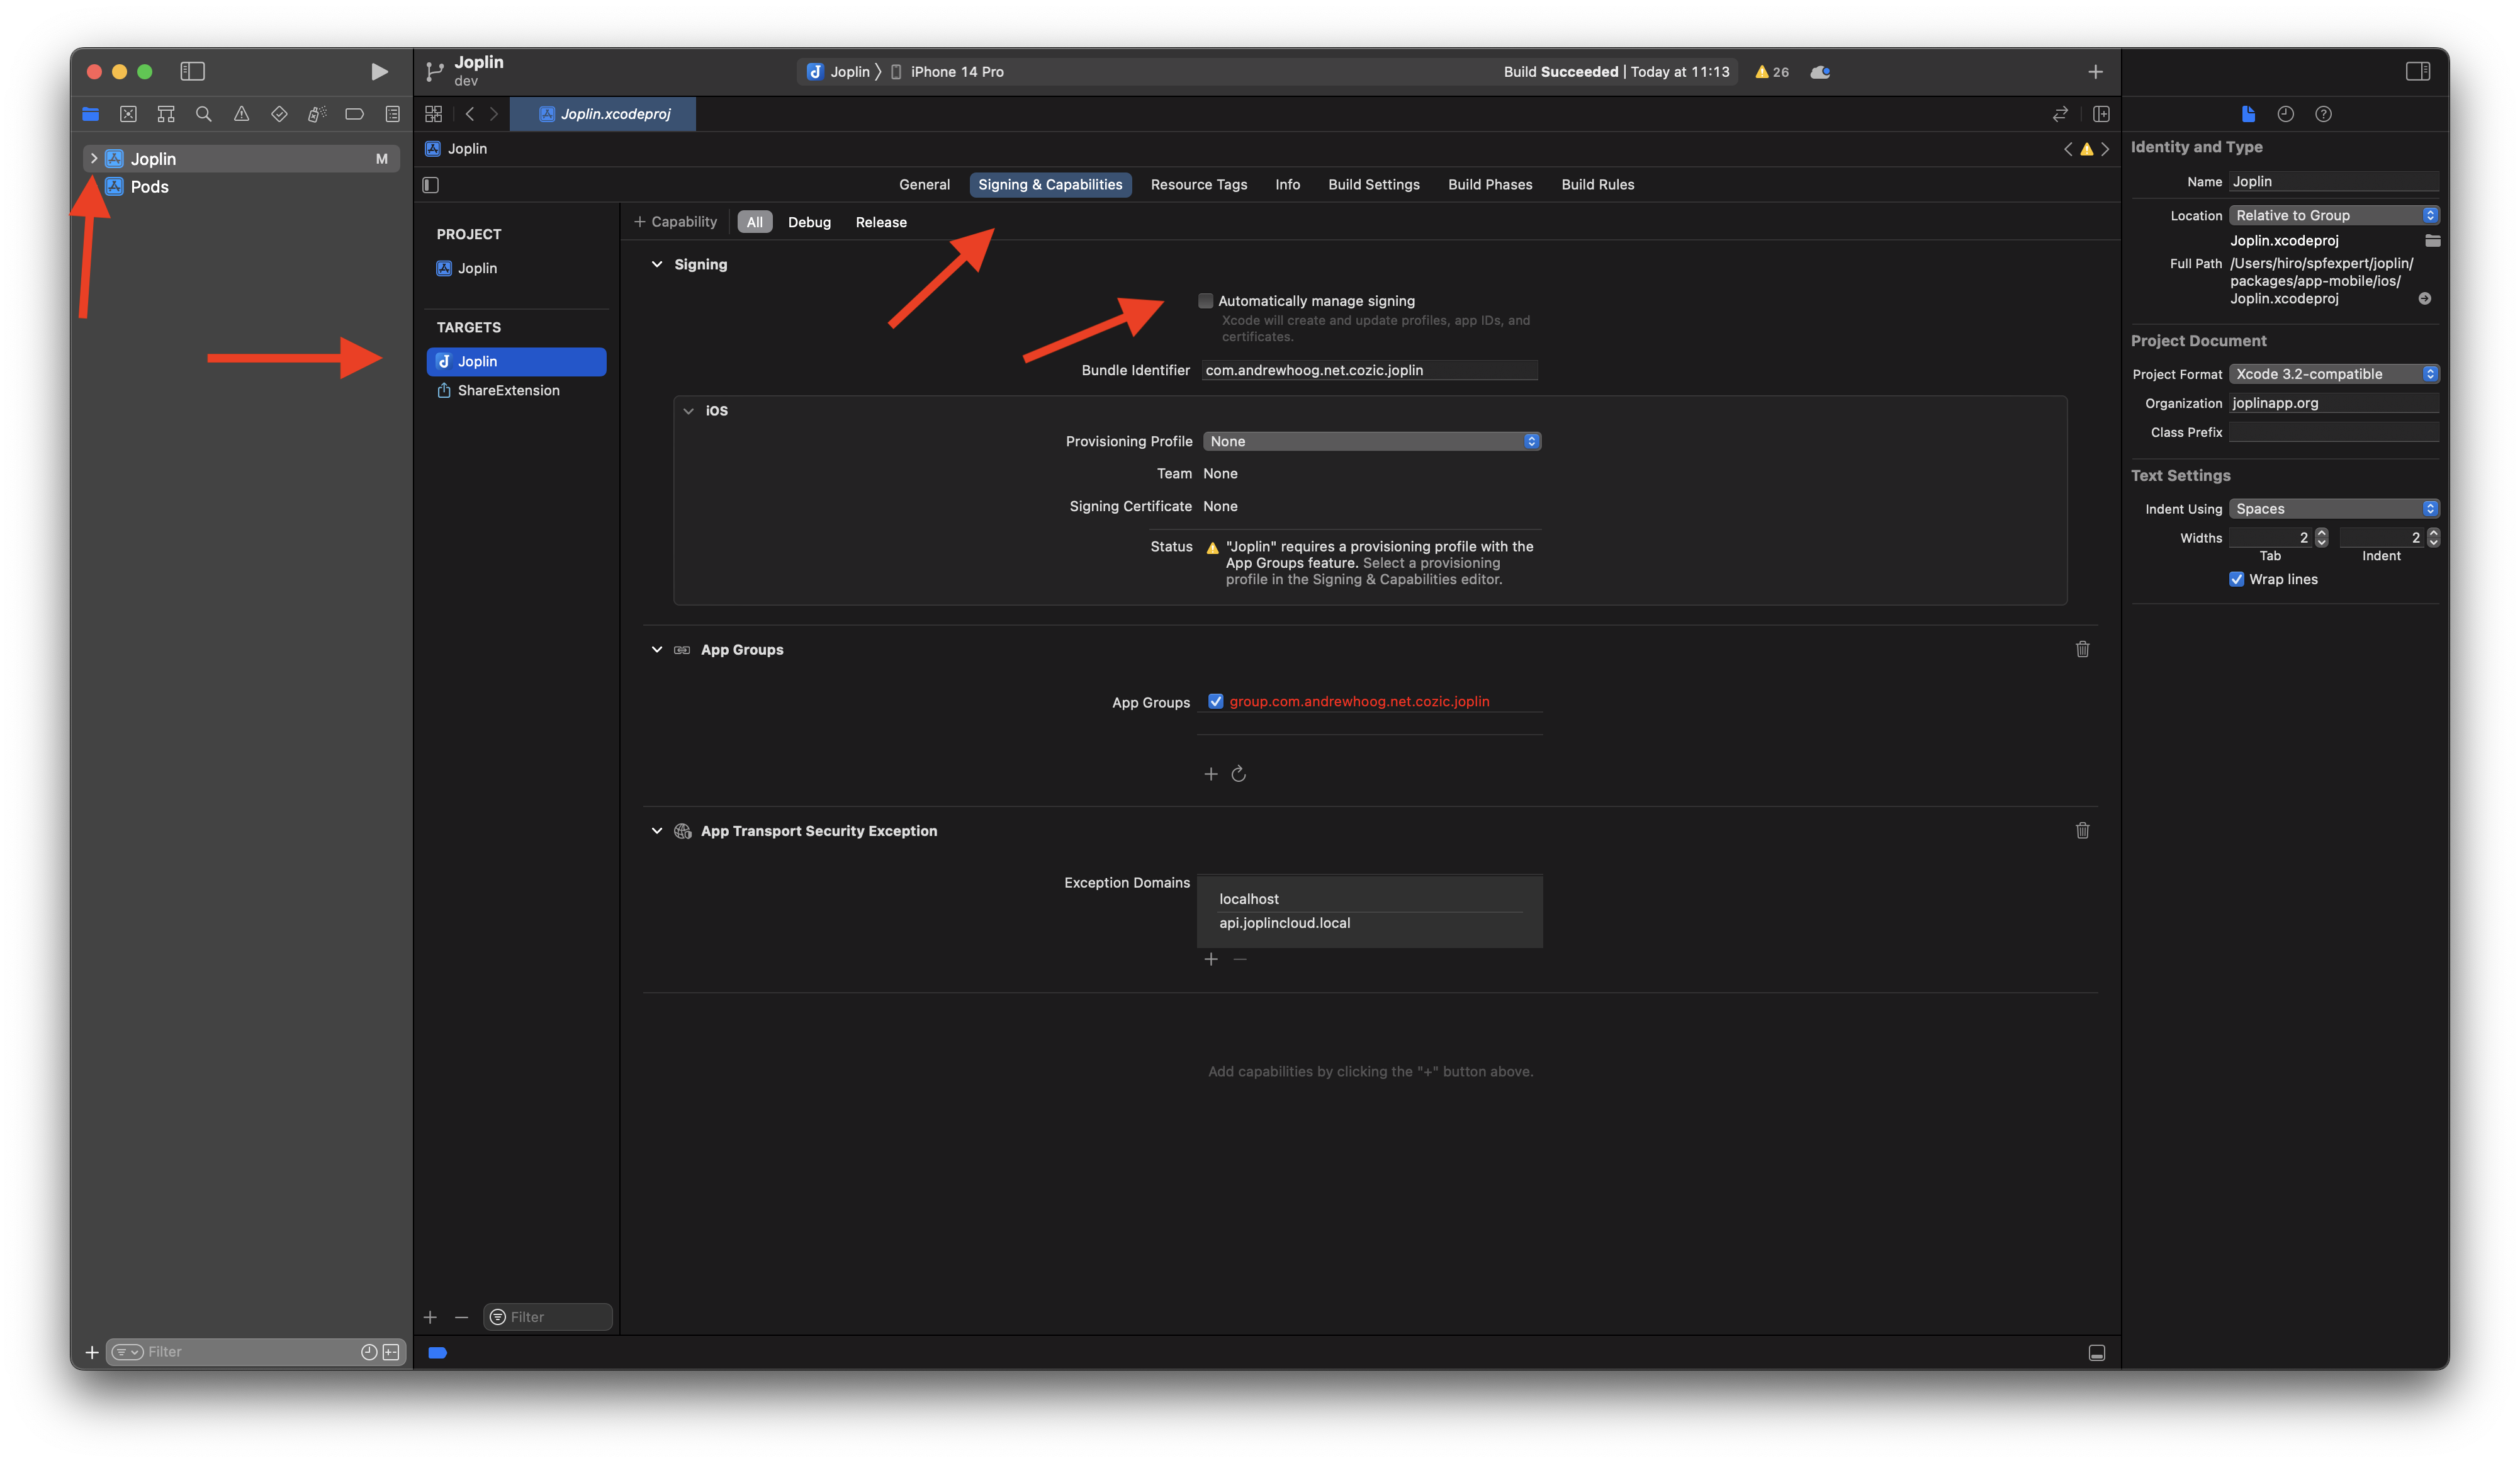 Disable Automatically manage signing in Xcode